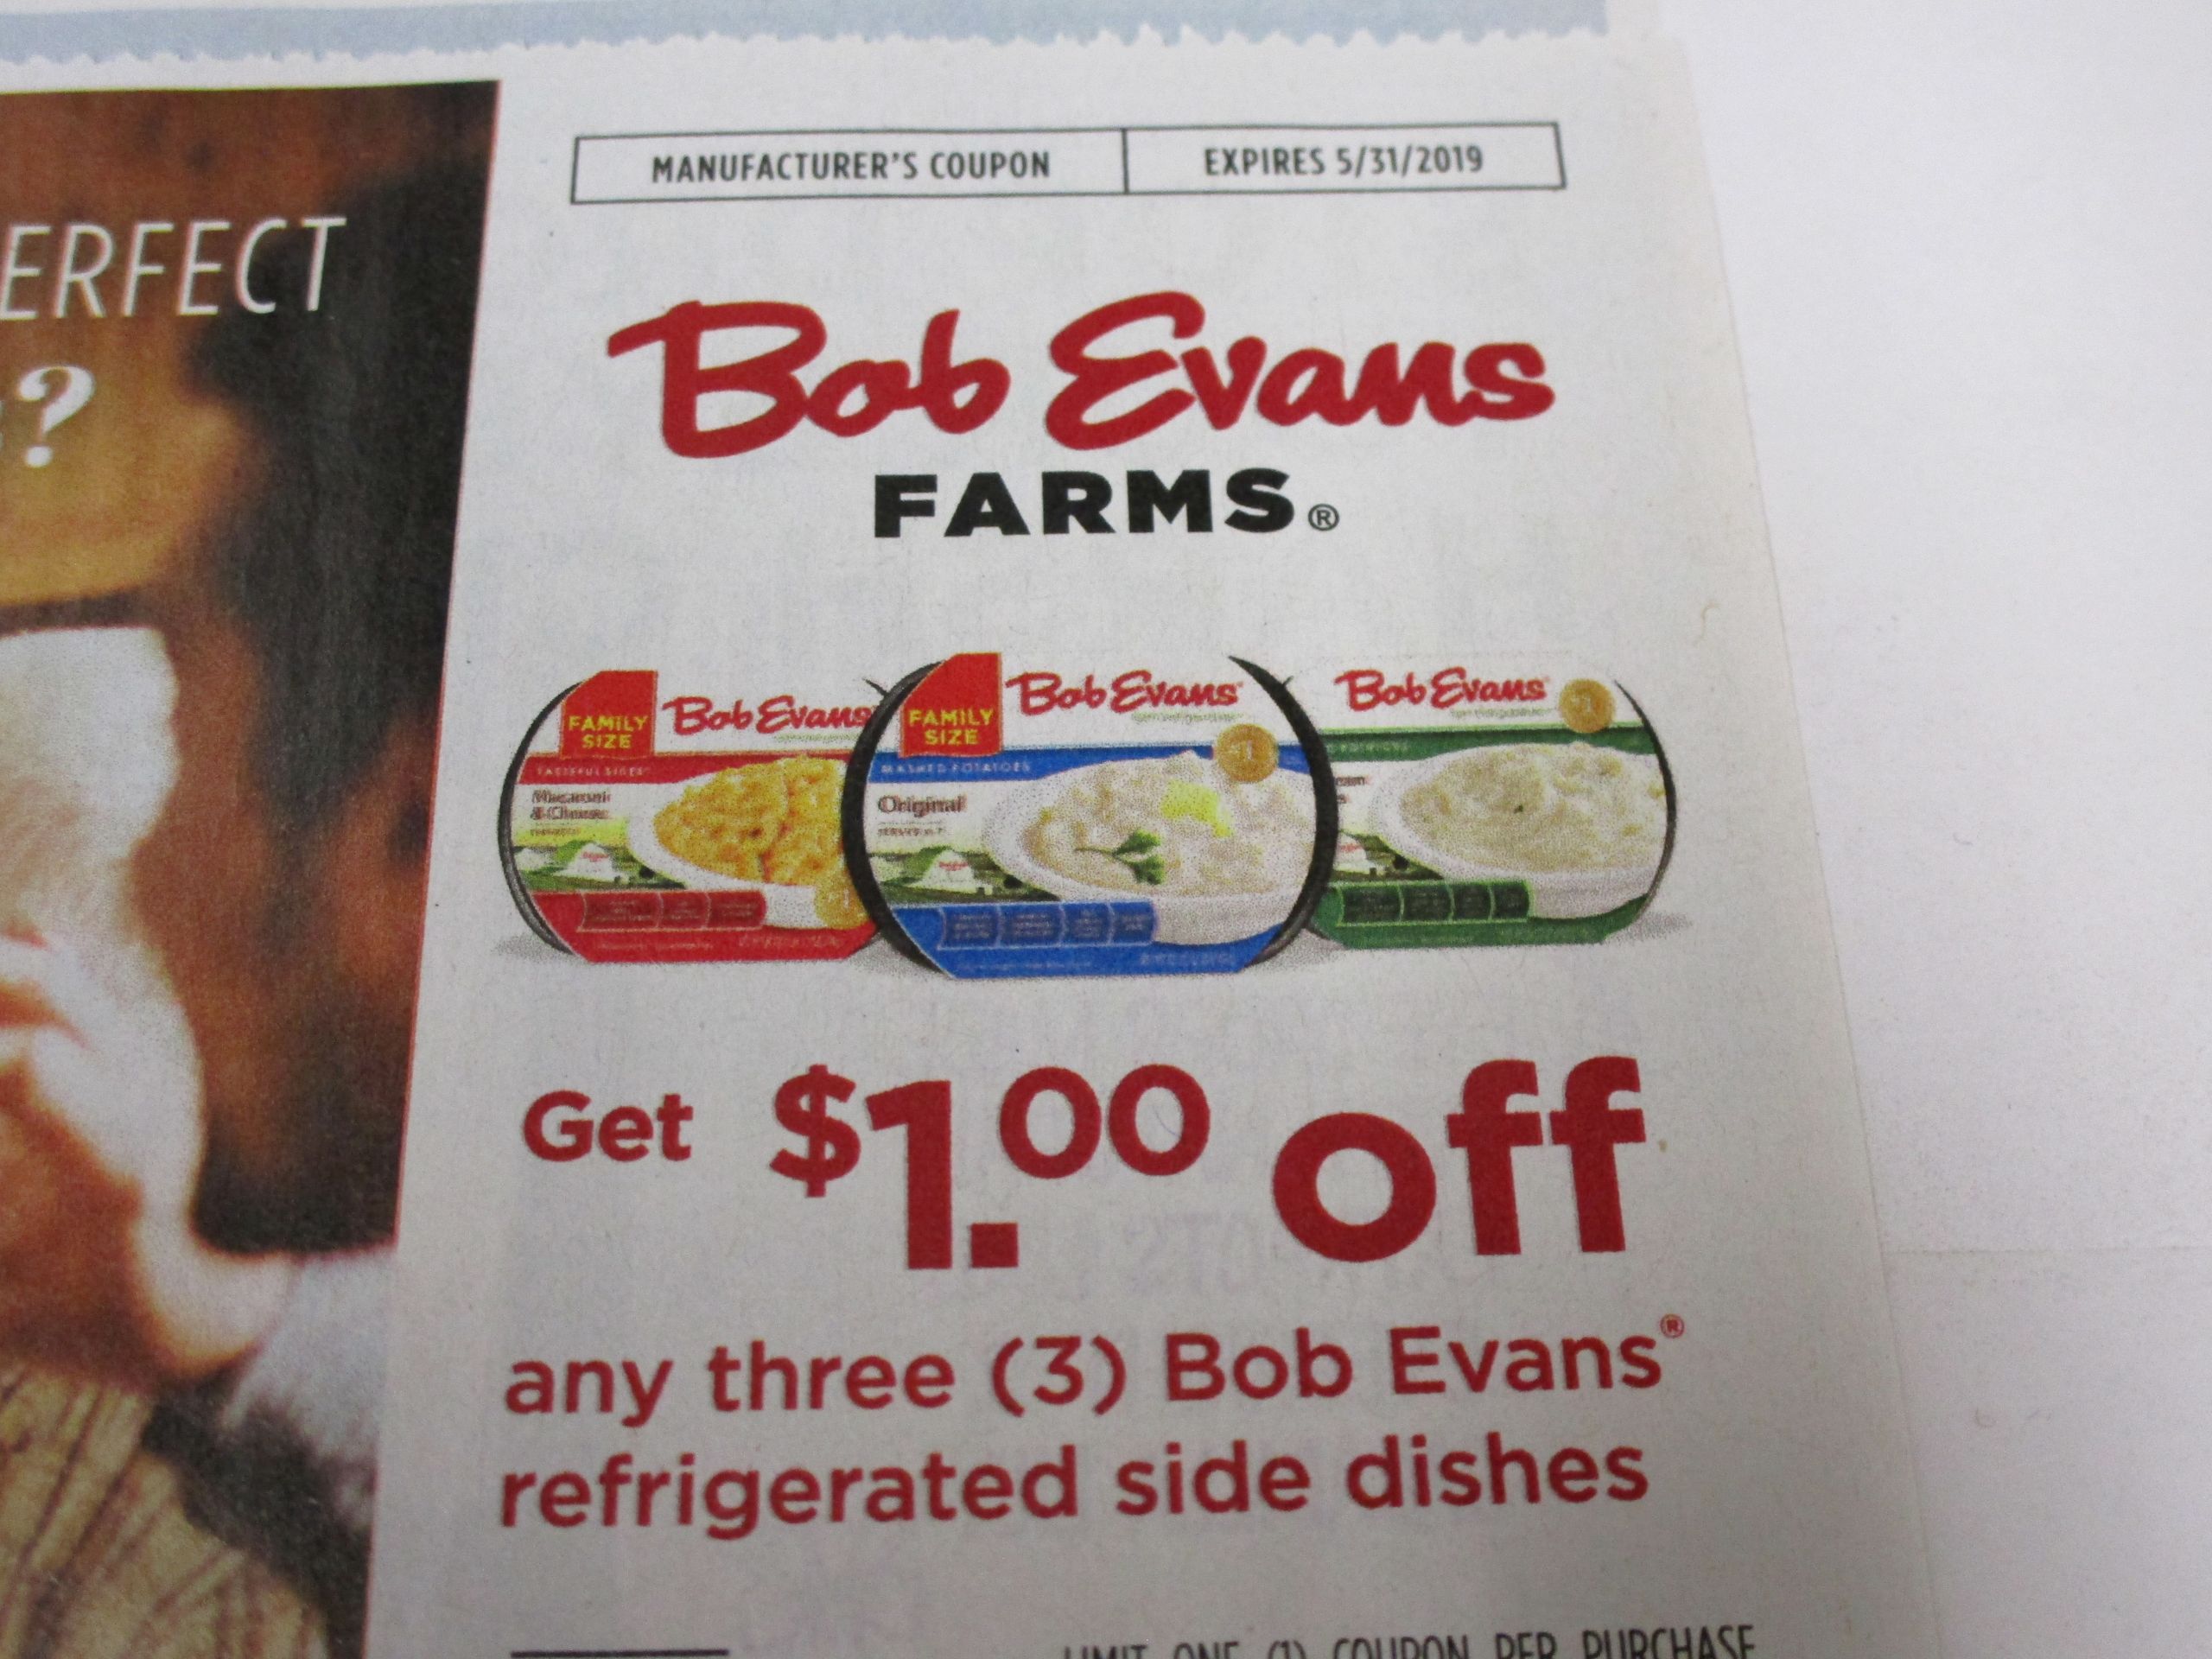 Bob Evans Refrigerated Side Dishes
 15 Coupons $1 3 Bob Evans Refrigerated Side Dishes 5 31 2019